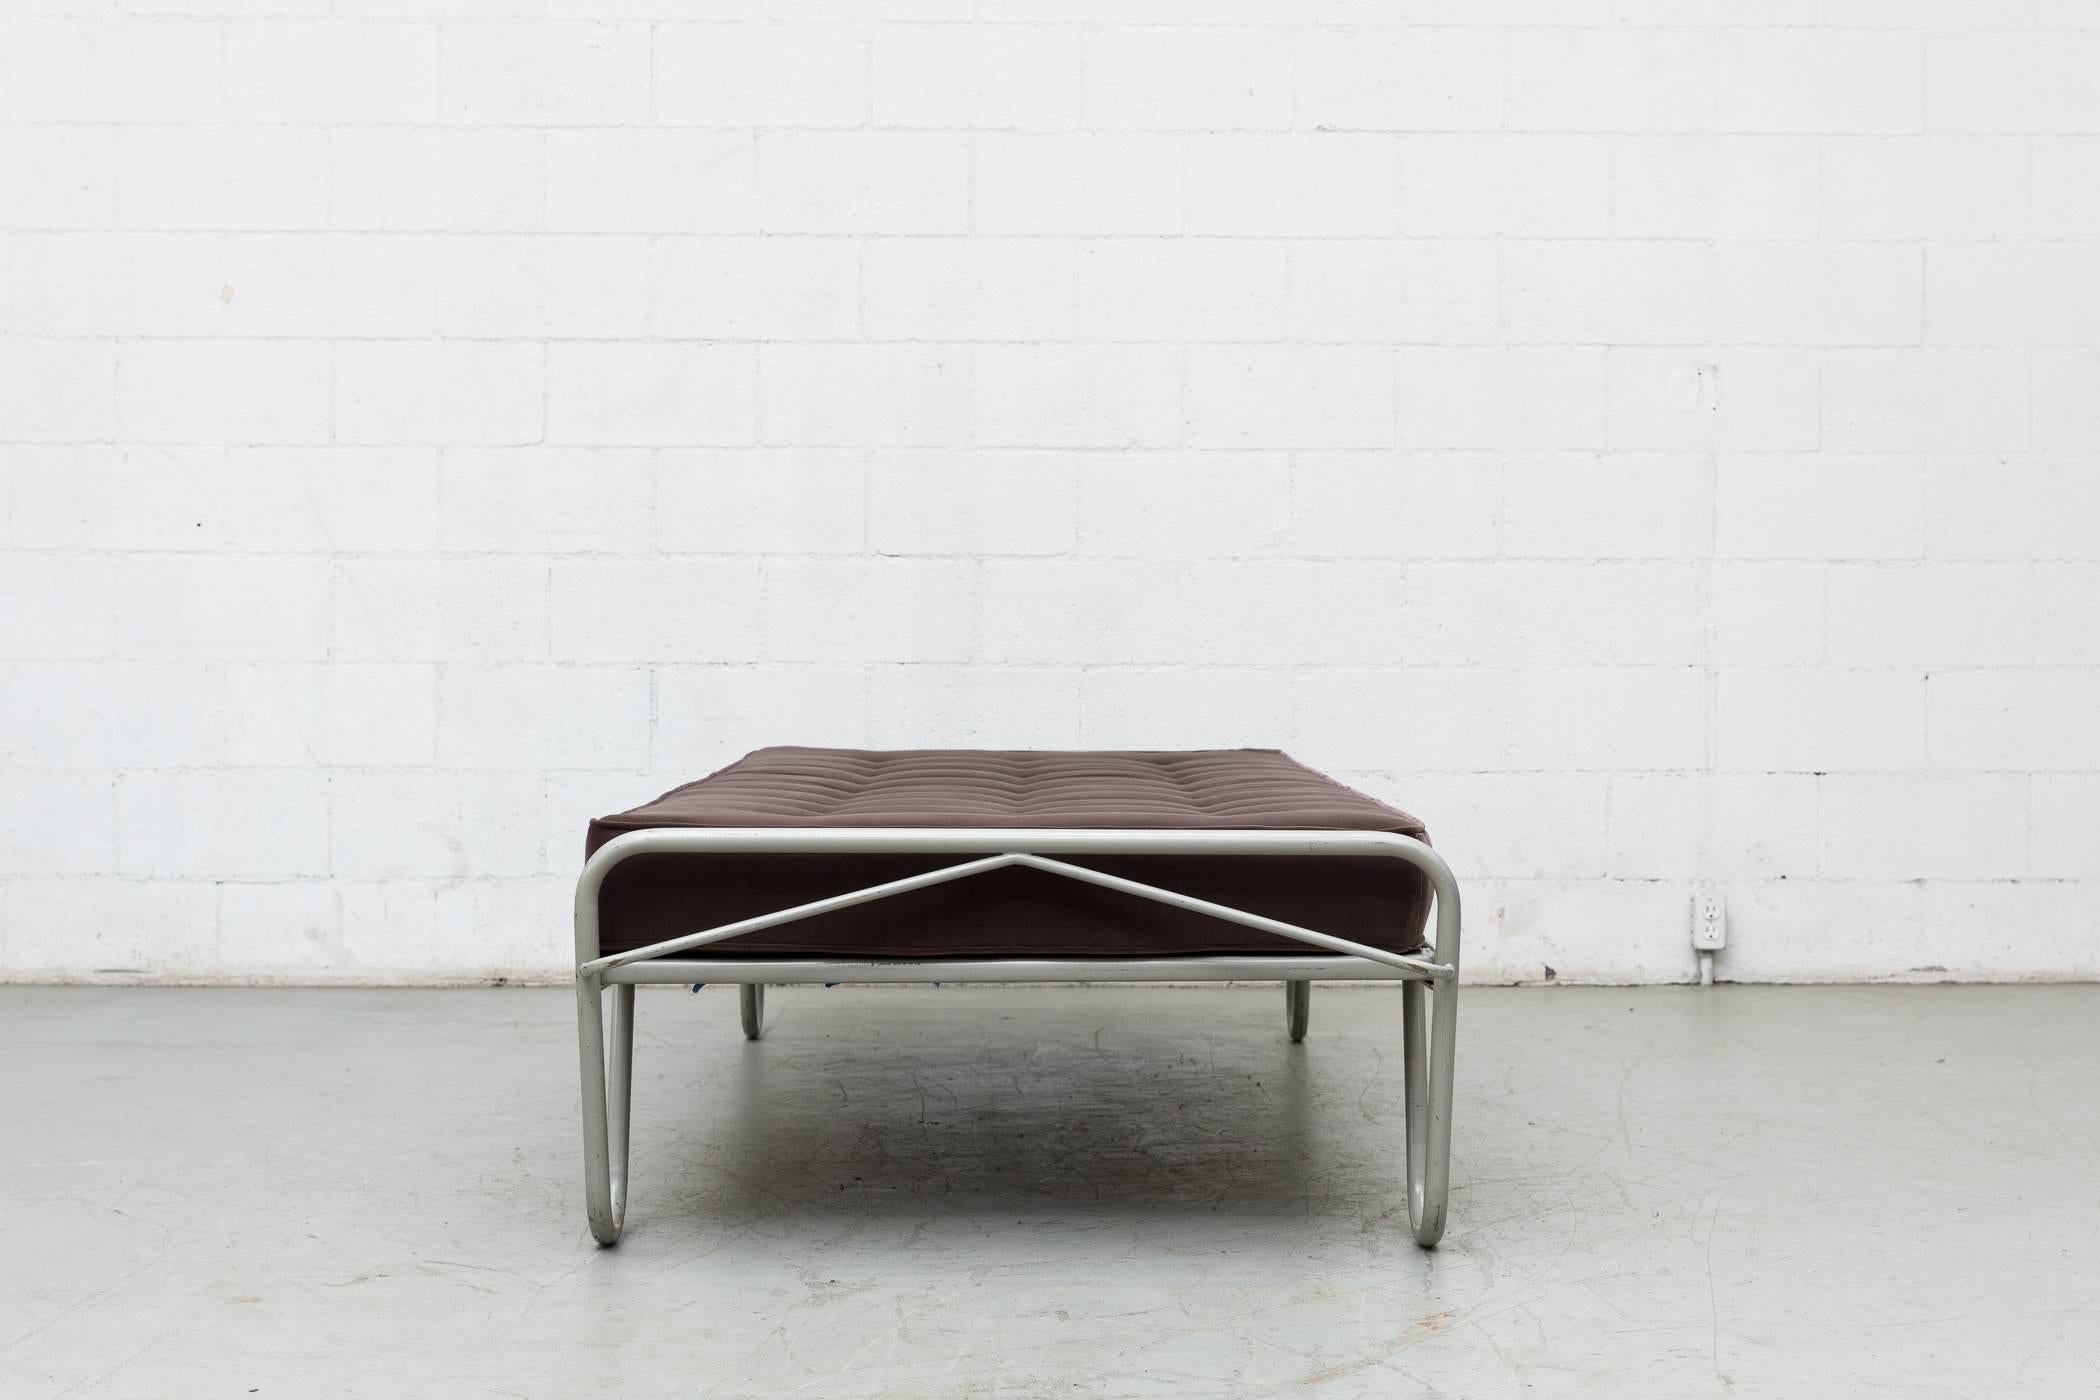 New seal grey tufted velvet mattress on an Institutional grey enameled metal single bed frame by A.R. Cordemeyer and manufactured by Kupers in Almelo, 1950s. The frame is in original condition with visible wear to the enamel. Can be disassembled for